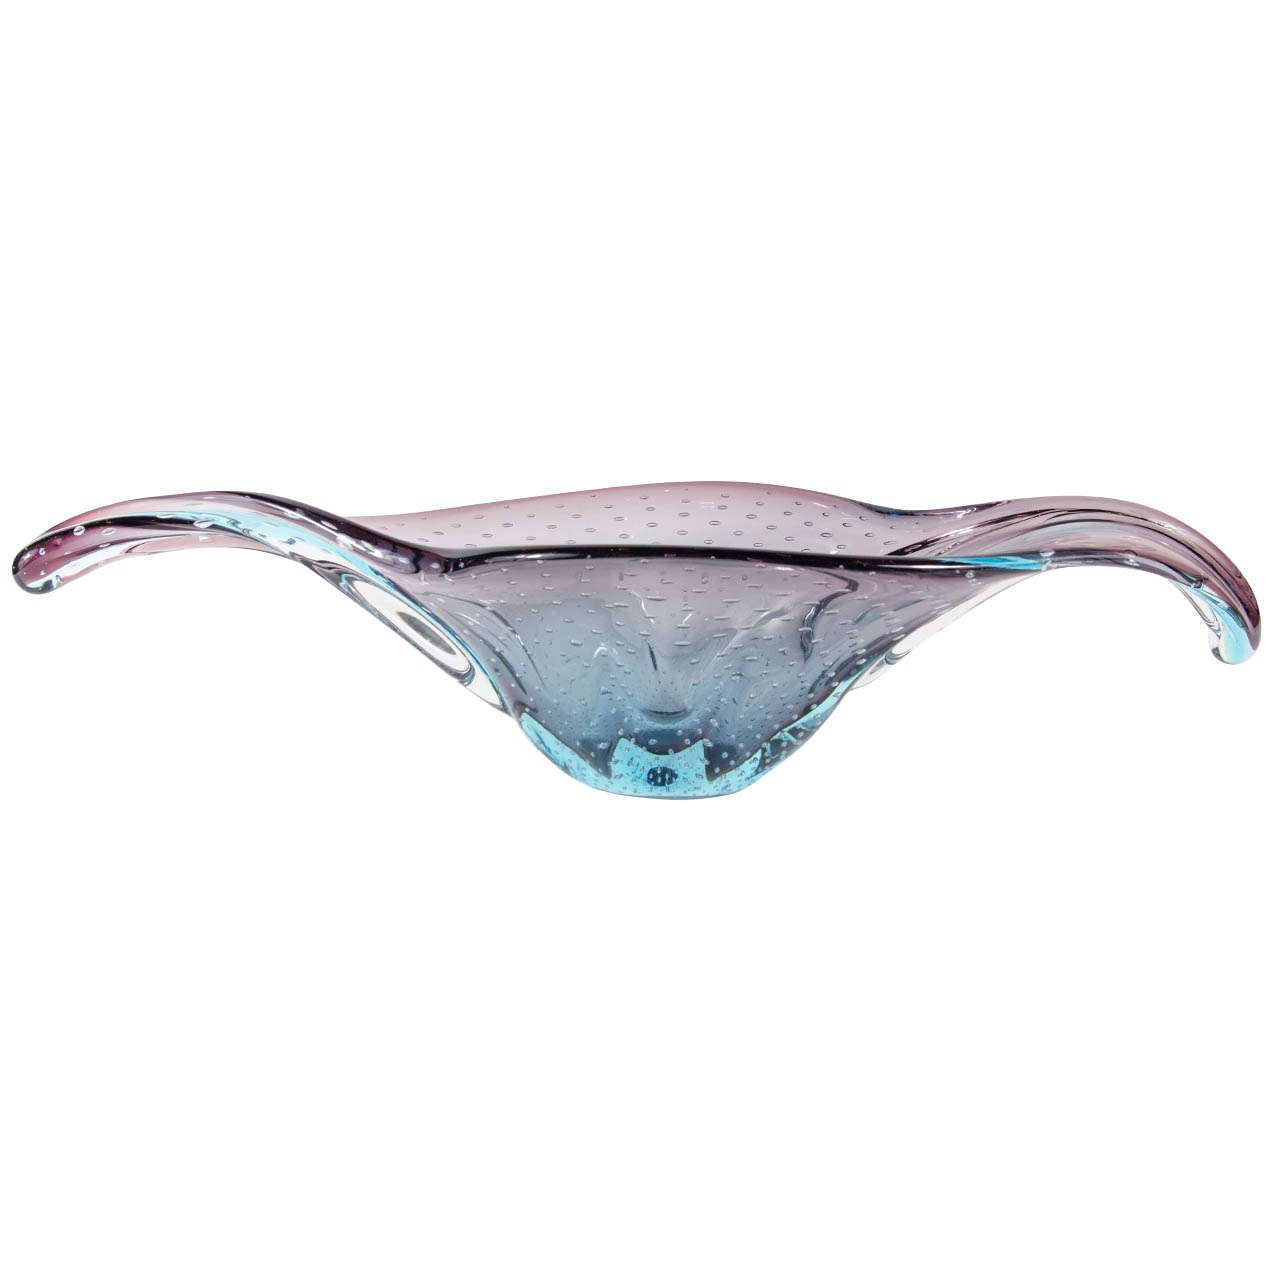 Sinuous Murano Glass Bowl with Free Form Design